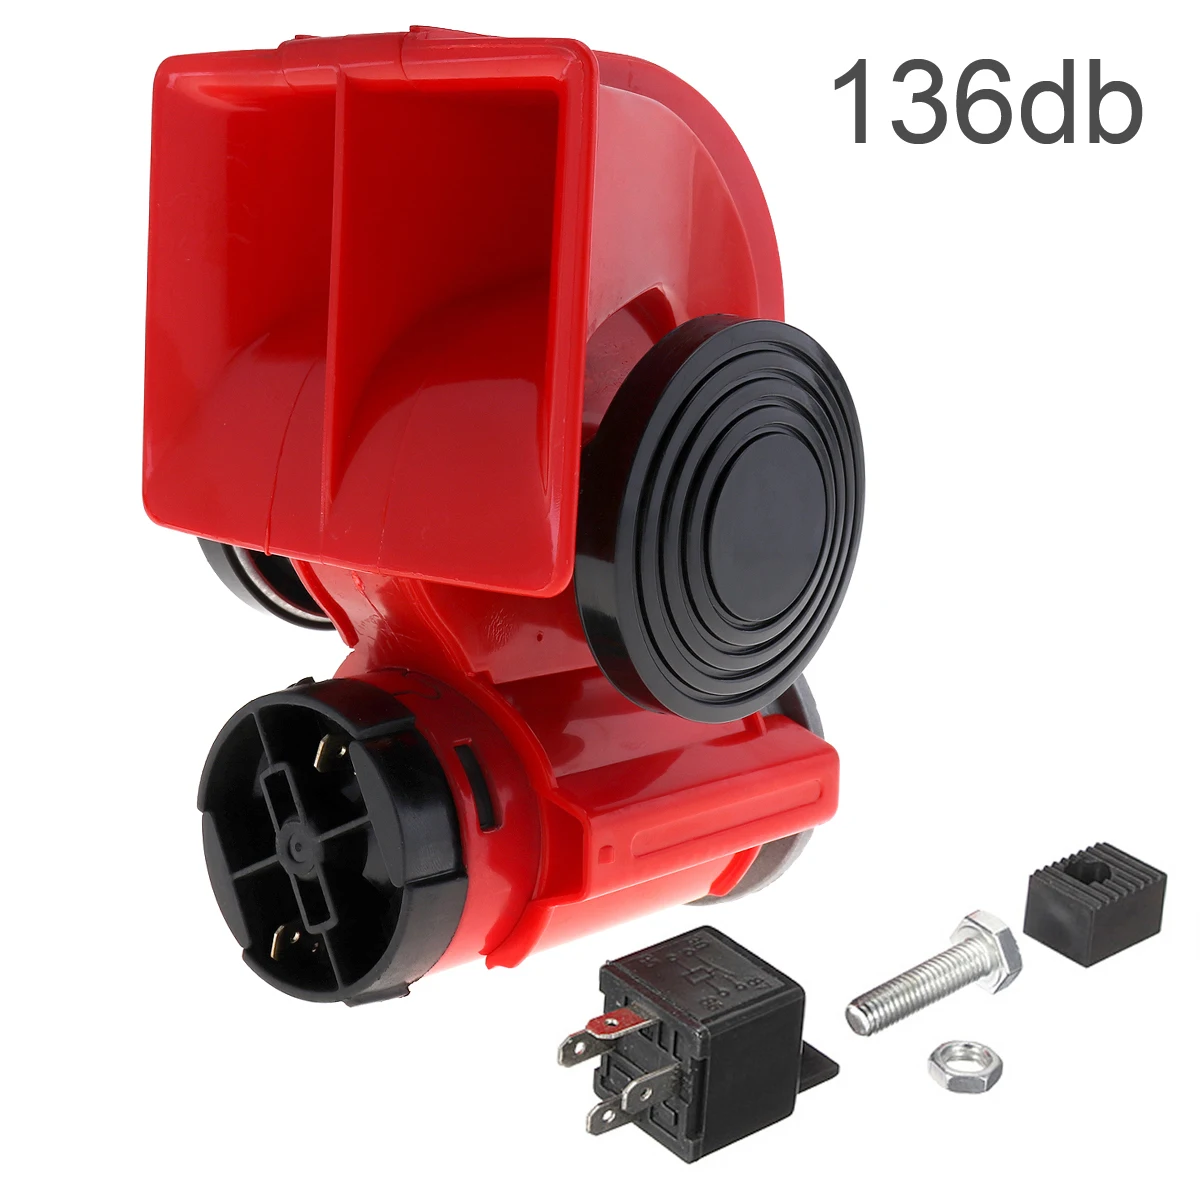 

1 Pc 12V 20A-30A 136db Red ABS Snail Compact Air Horn with Relay Fit for Car Truck Motorcycle Boat RV Lorry Yacht SUV Motorbike